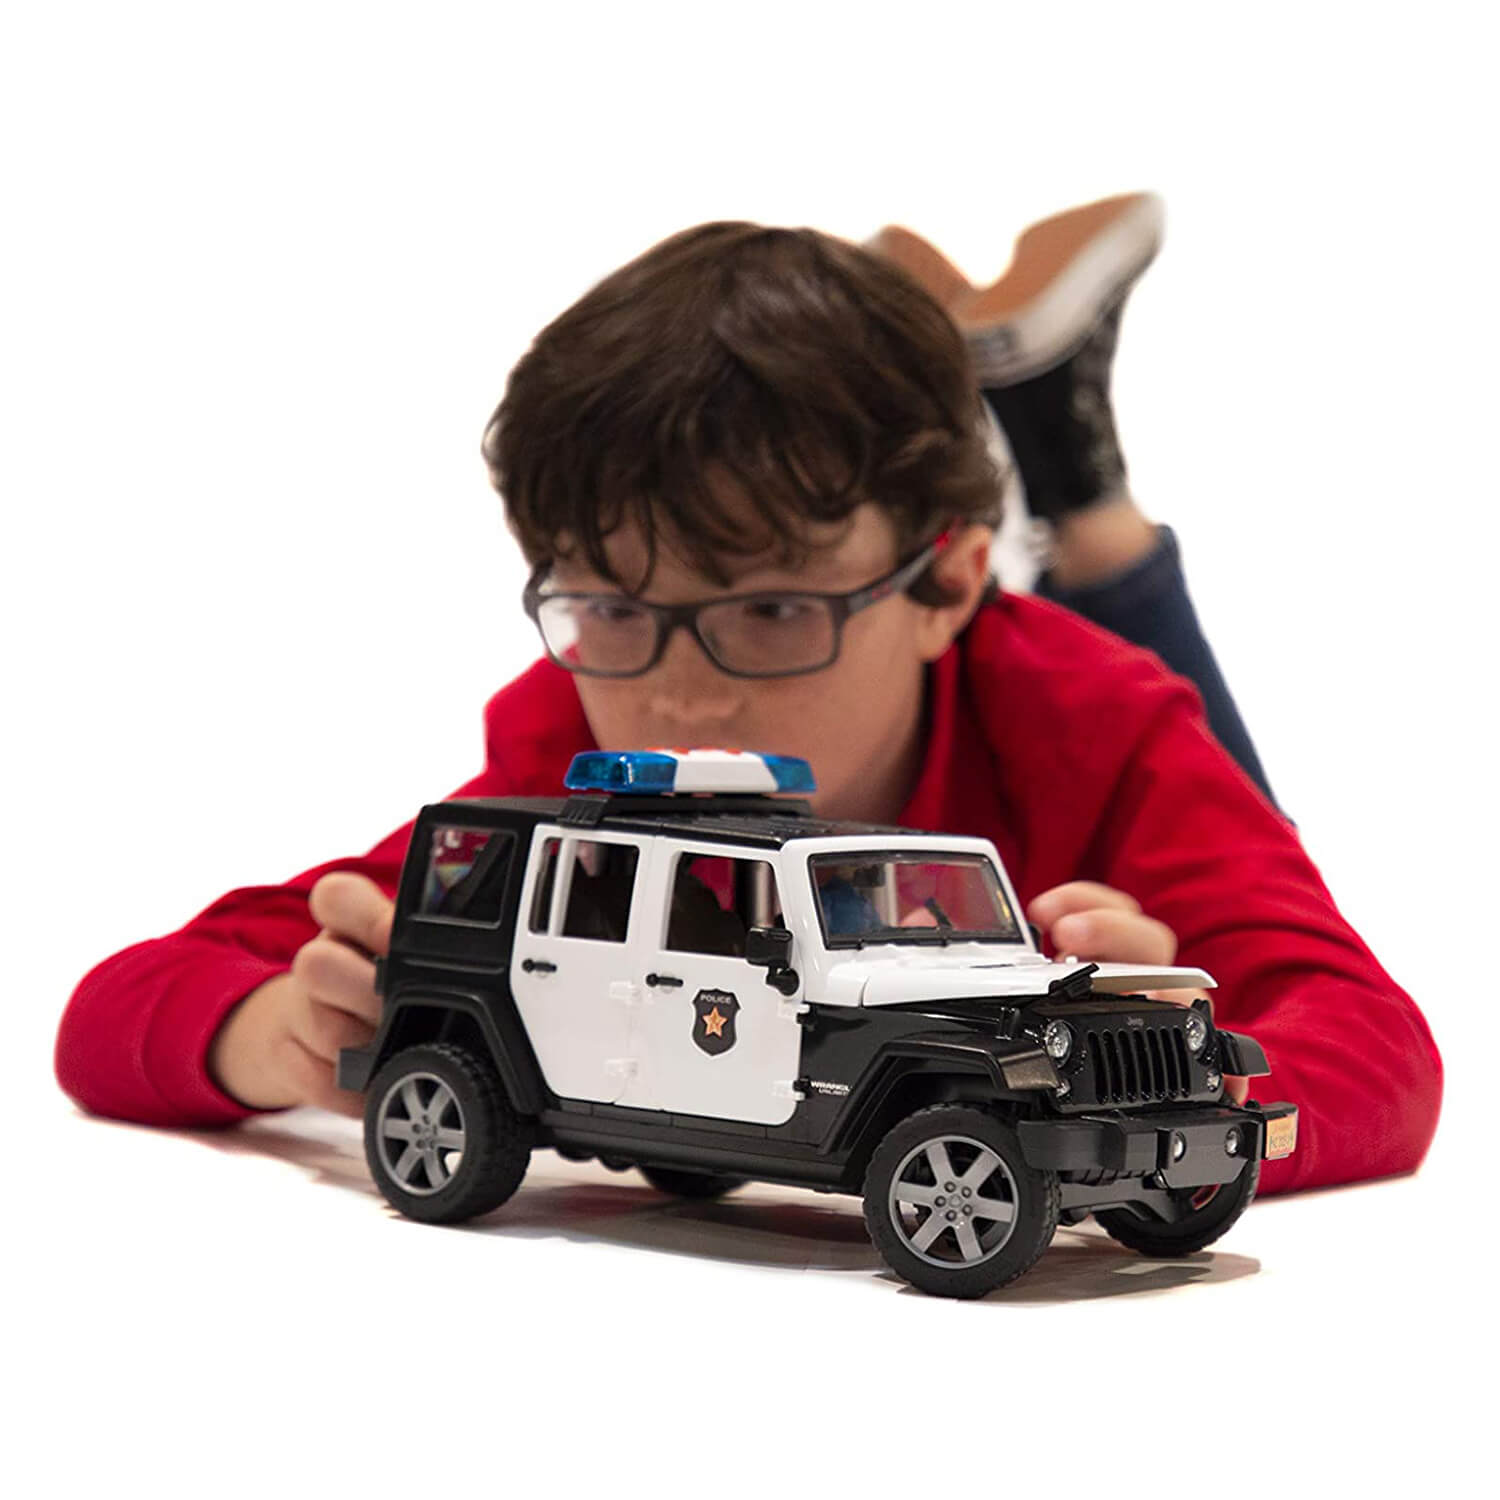 Kid playing with his jeep rubicon vehicle.